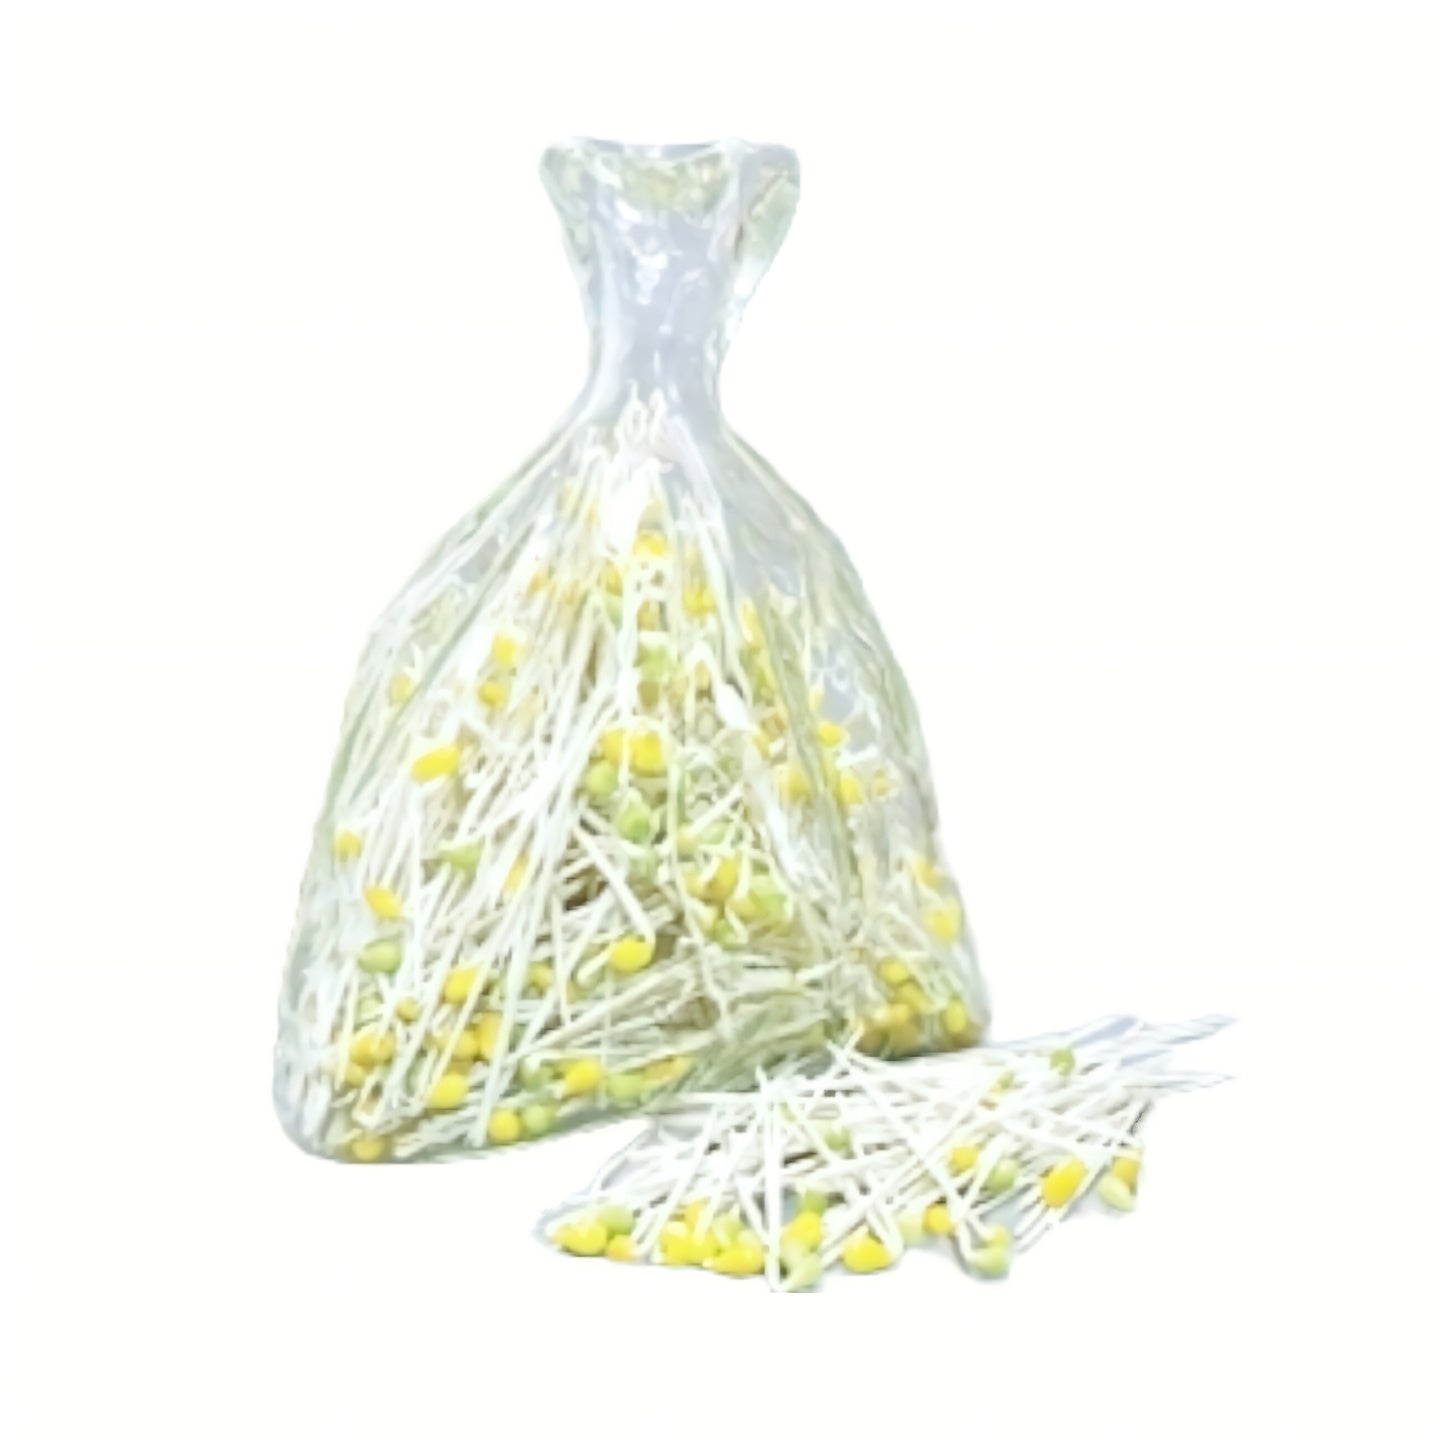 Soy Bean Sprouts 콩나물 Approx. 500g